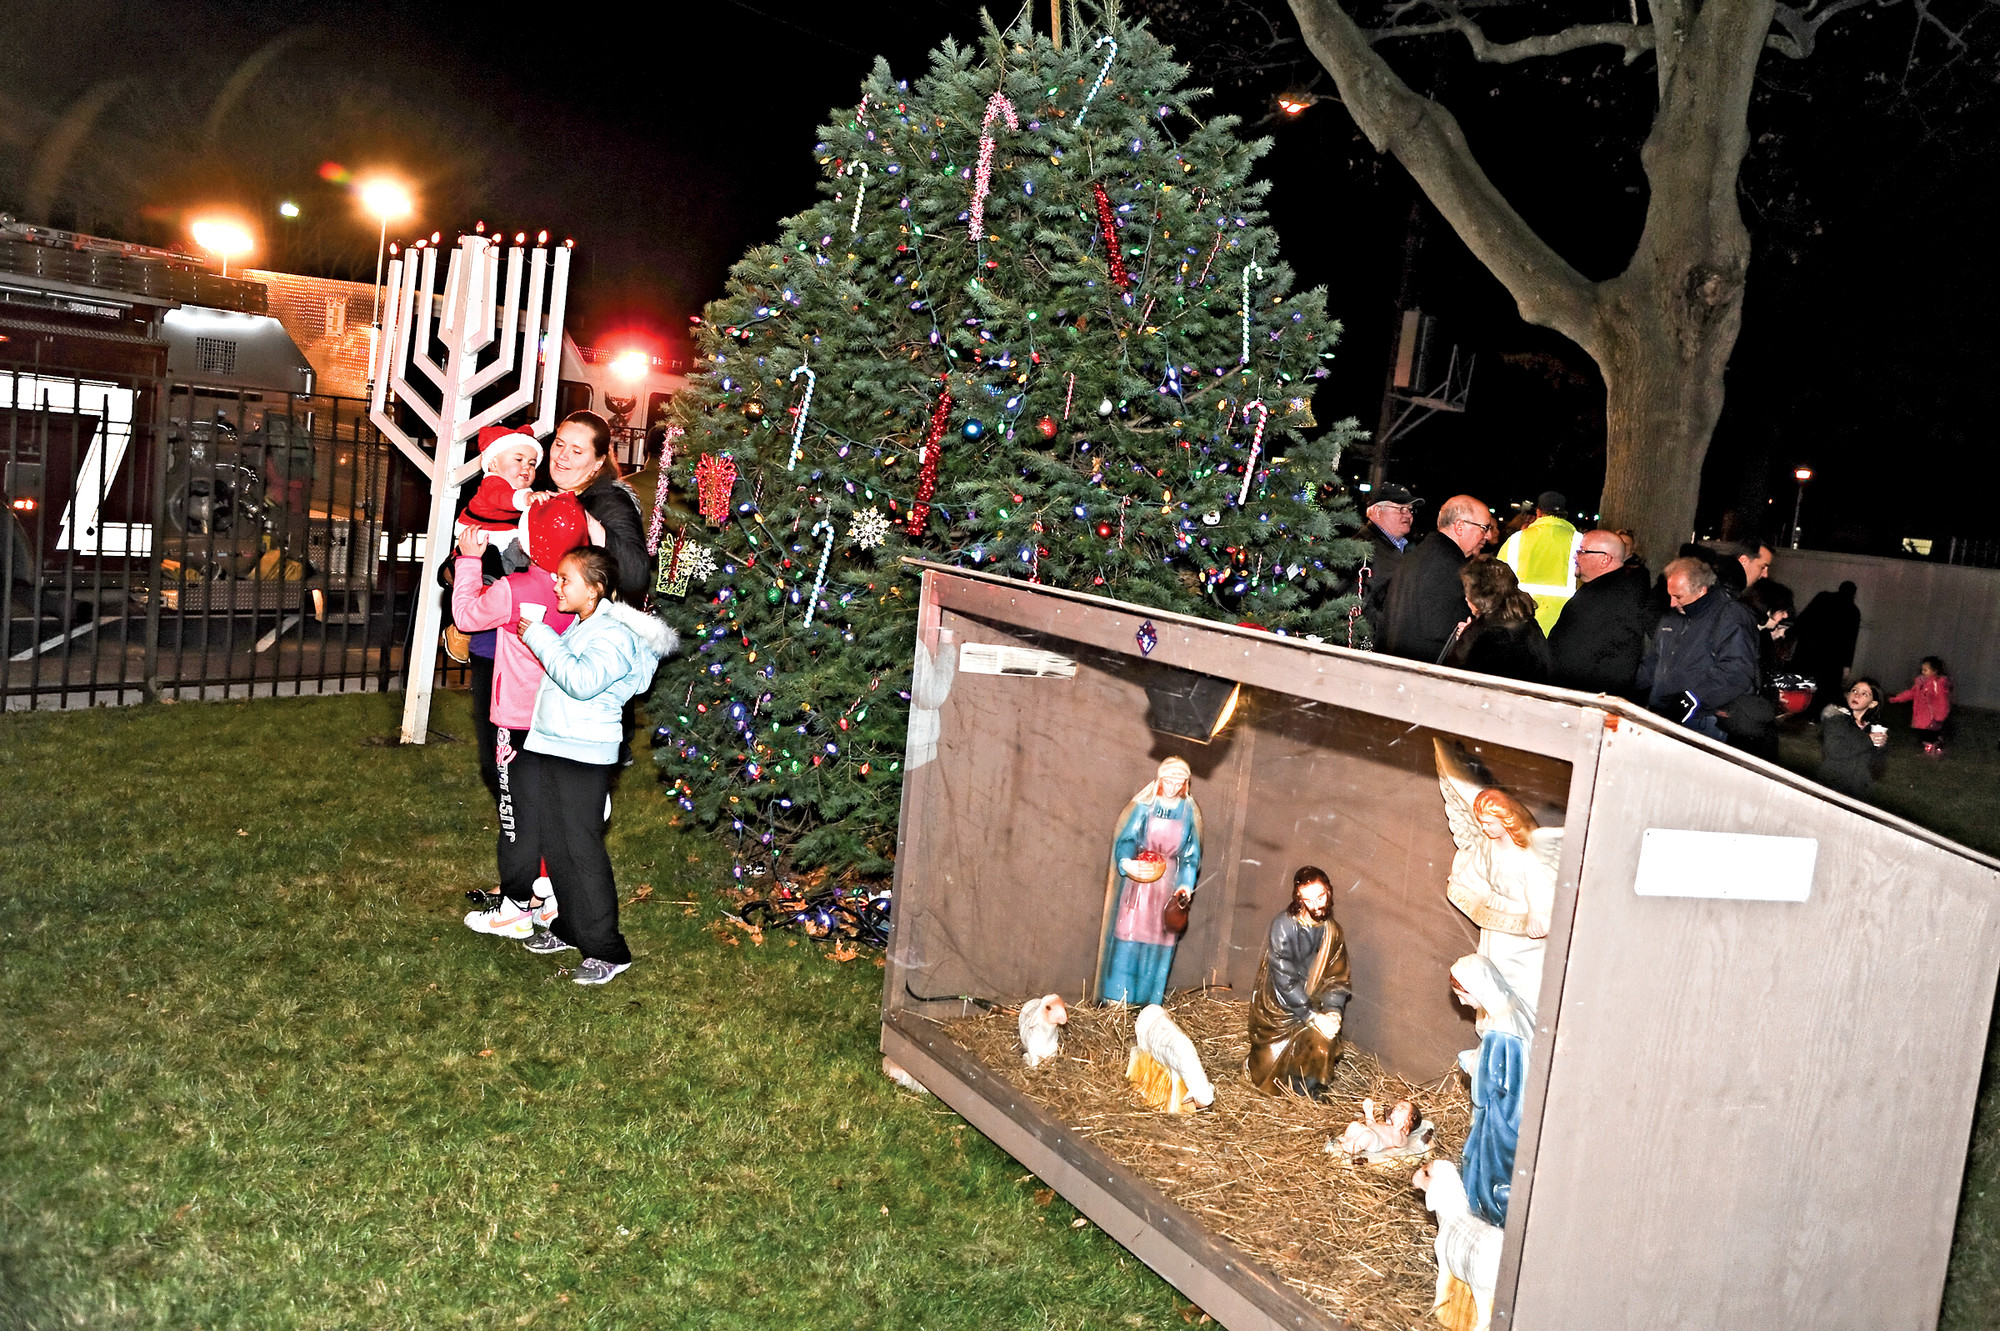 Residents posed in front of the Christmas tree, menorah, and the crèche depicting the birth of Christ.